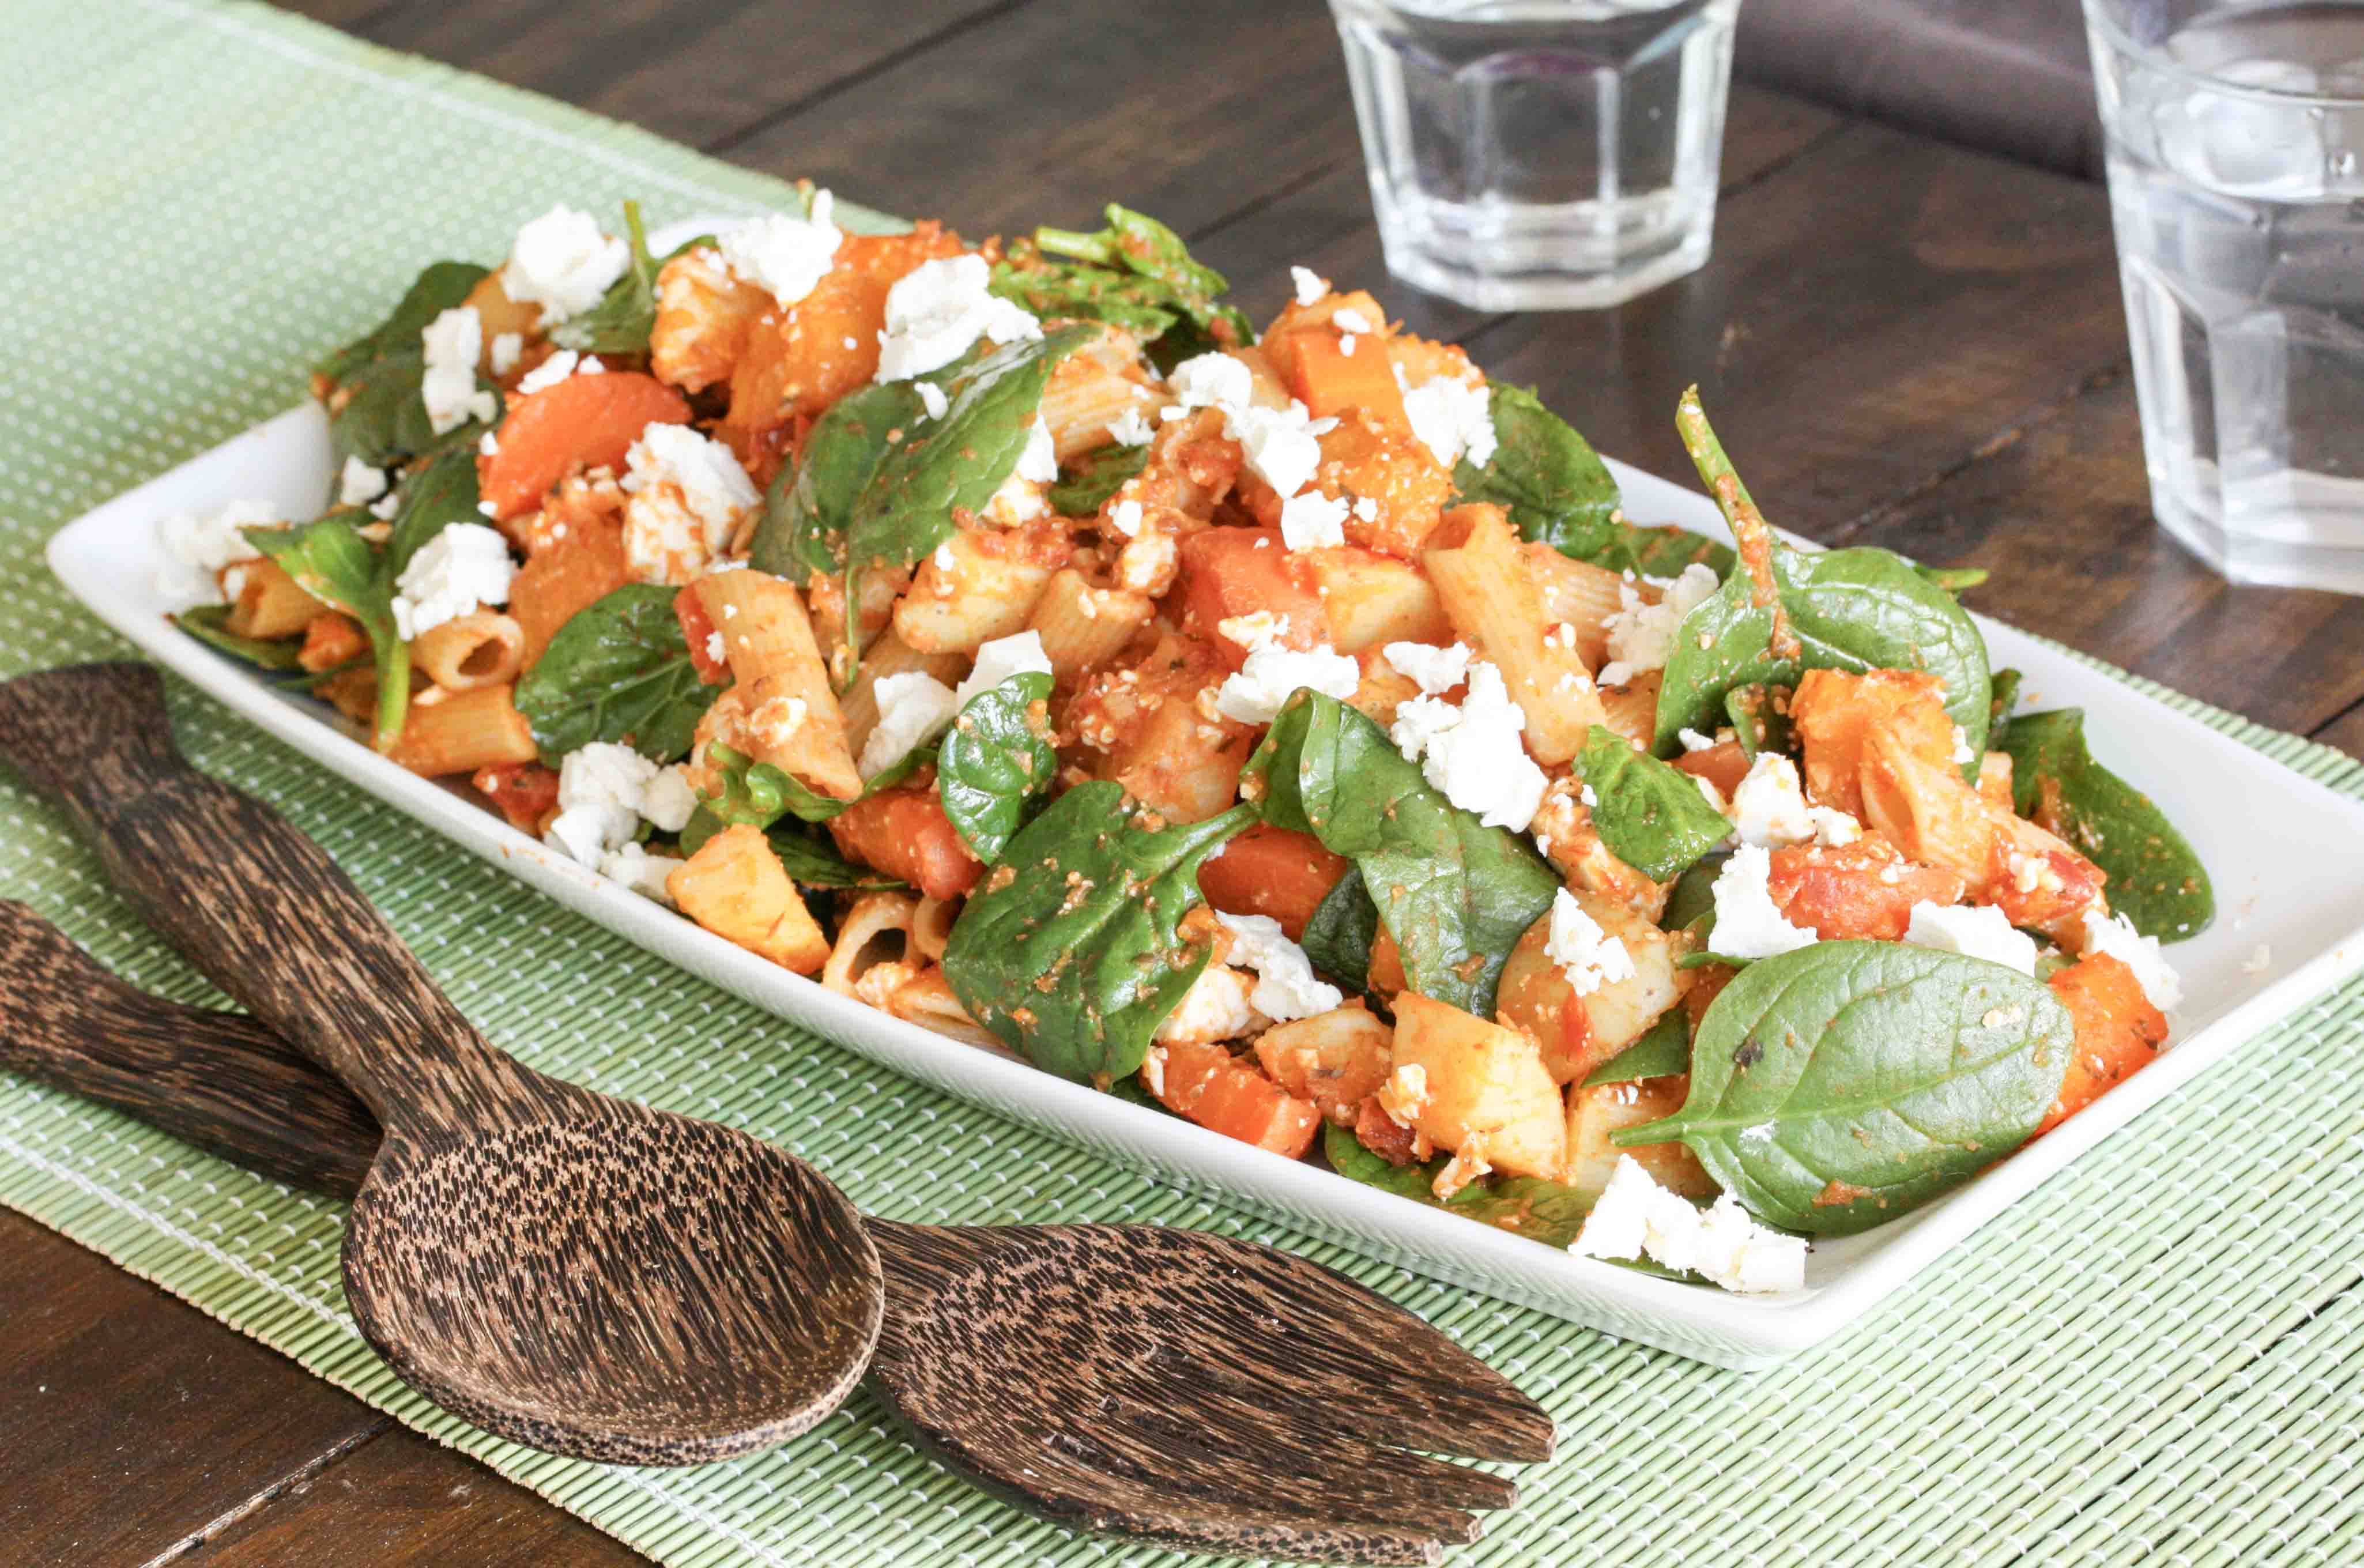 Pasta and roast root vegetables with sundried tomato sauce, baby spinach and feta